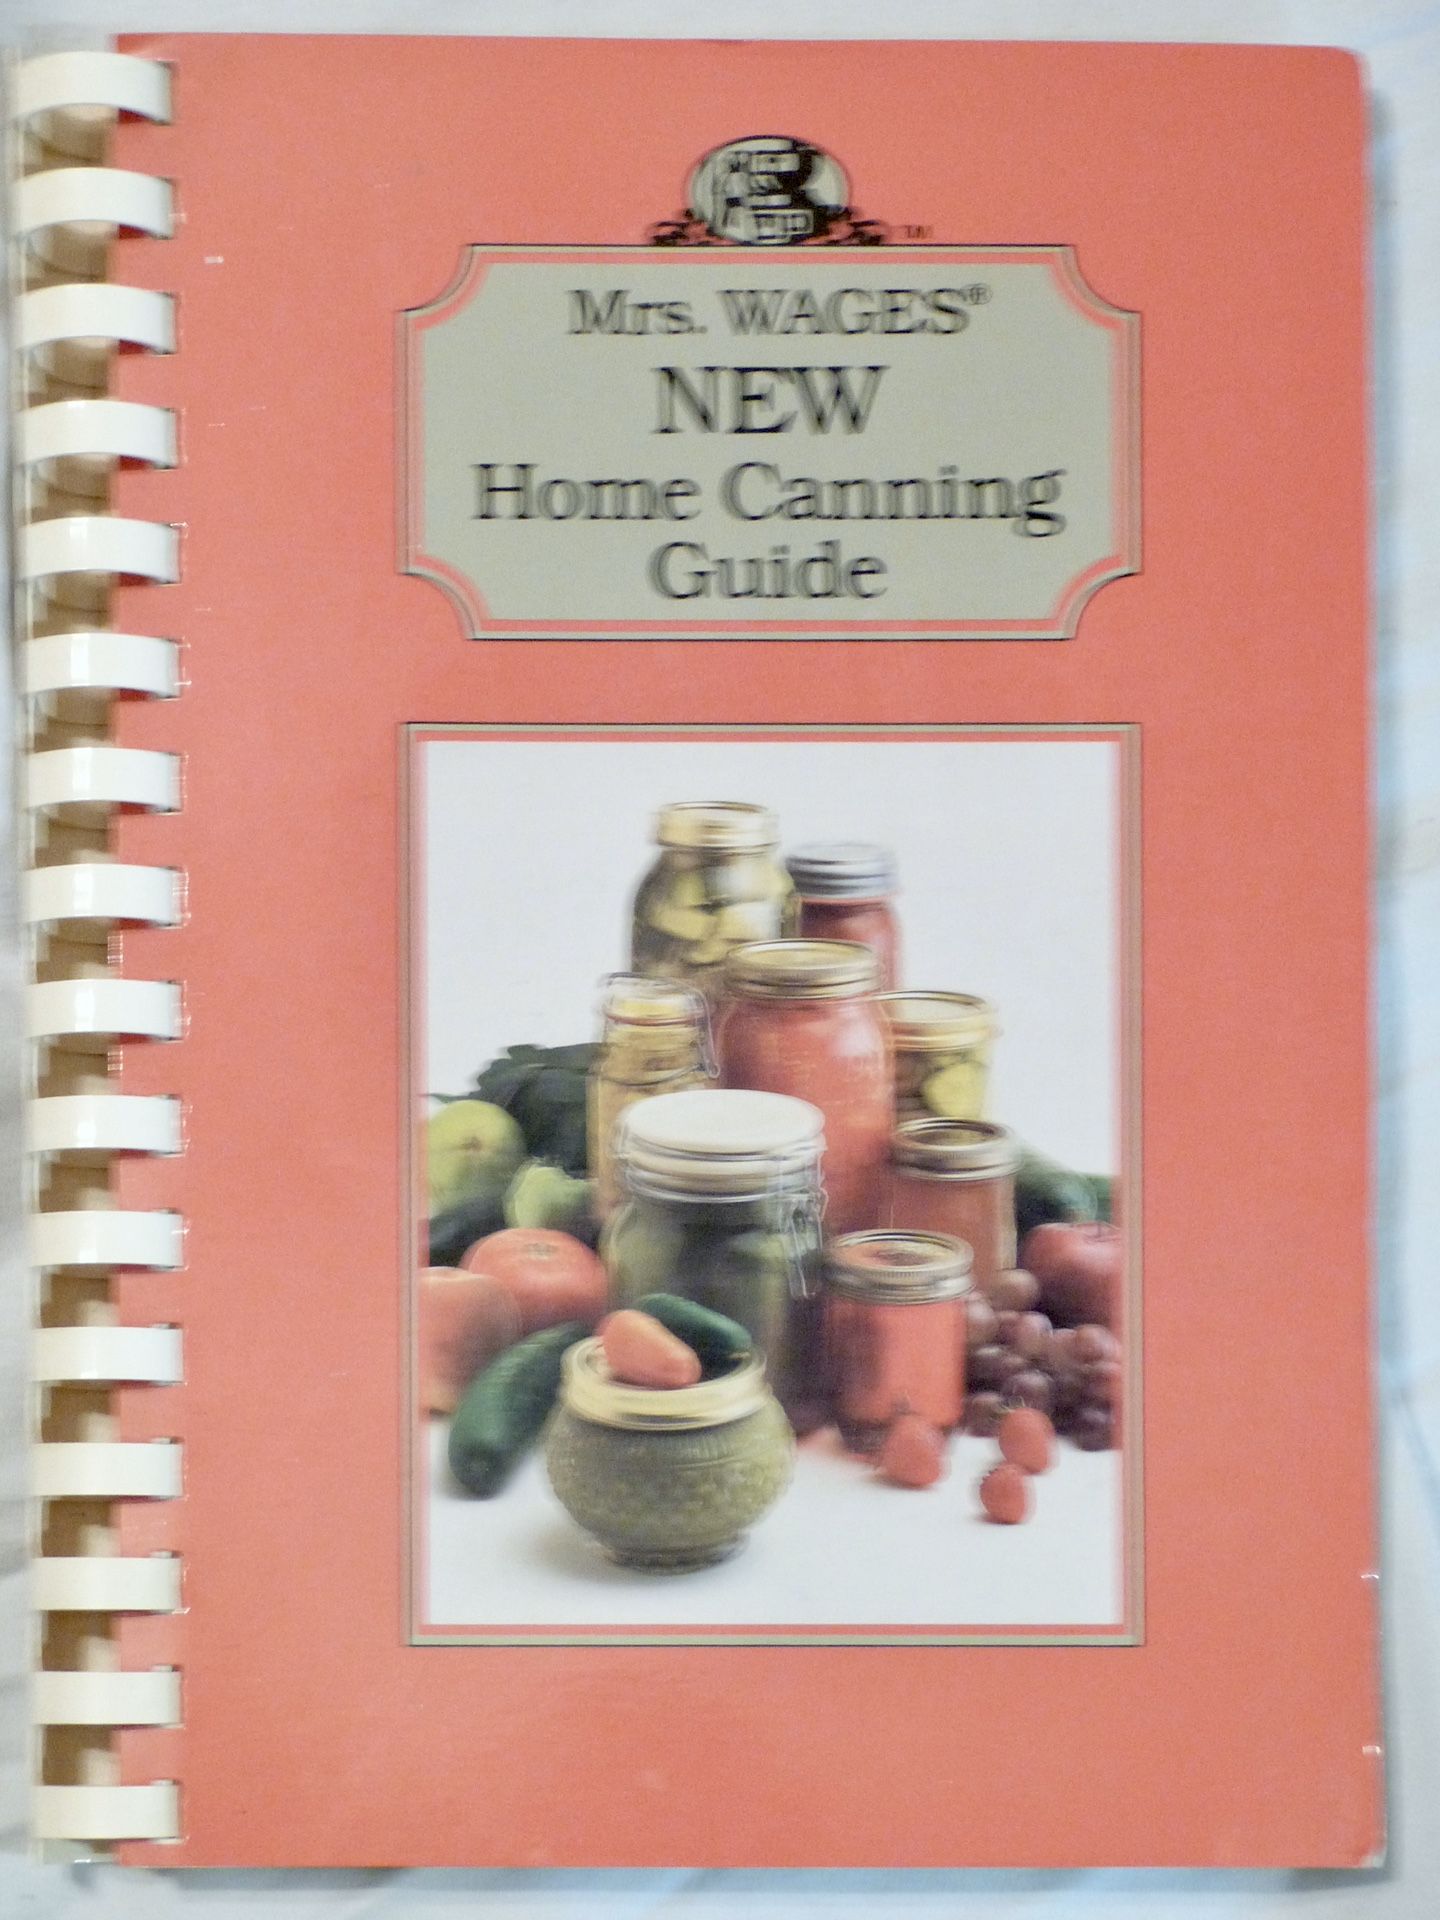 Home Canning Guide Book